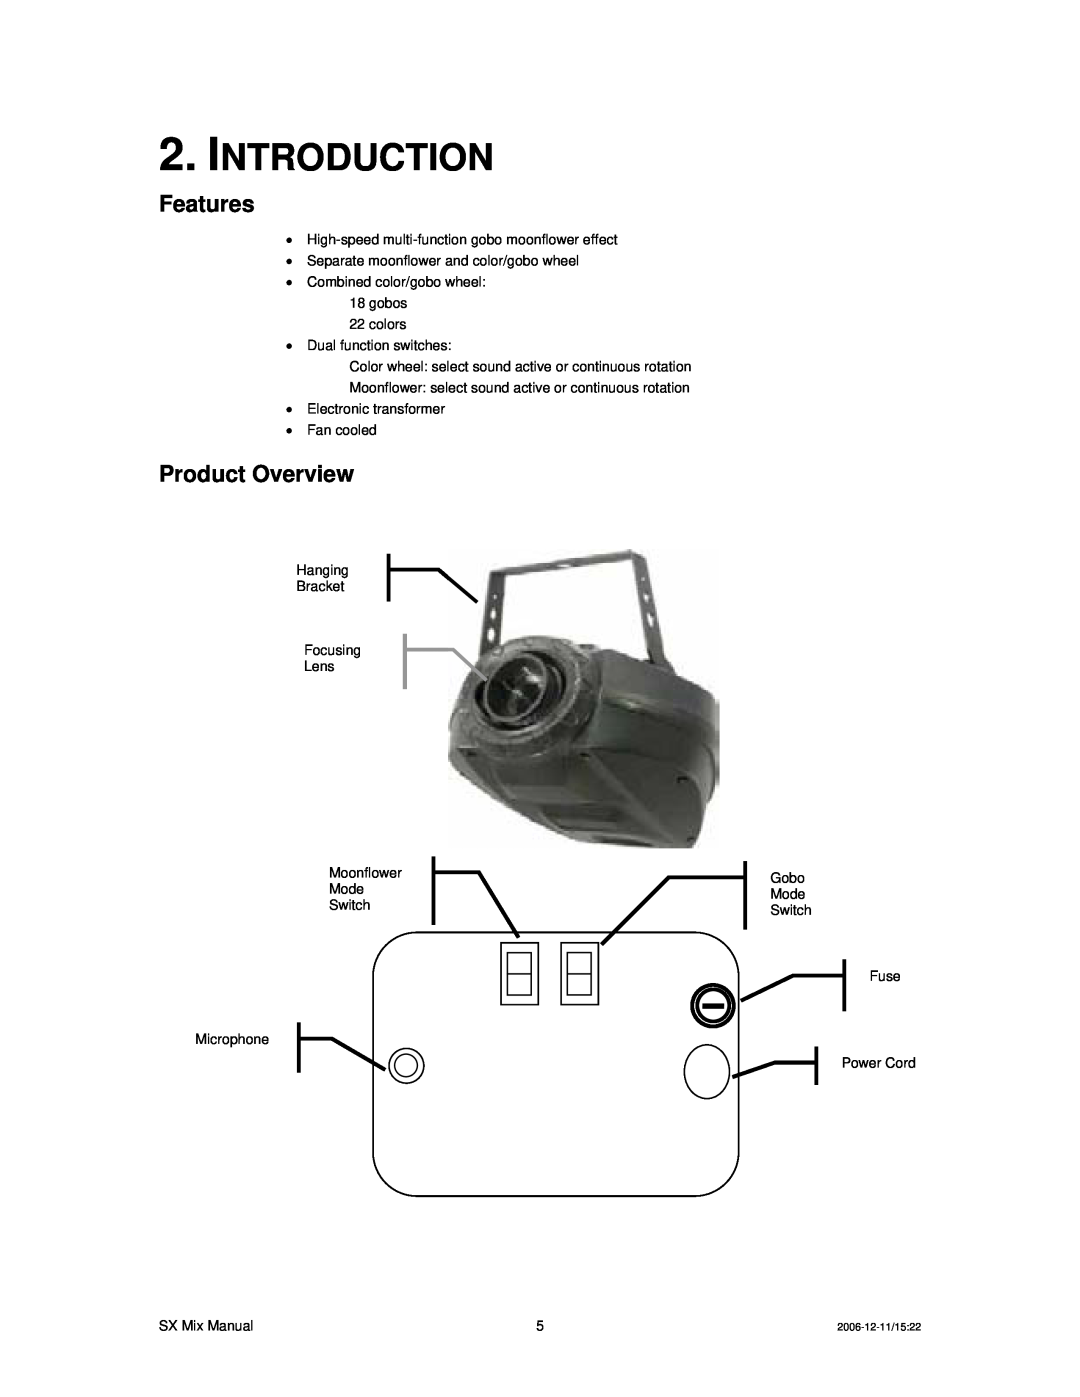 Chauvet DMX512 user manual Introduction, Features, Product Overview 